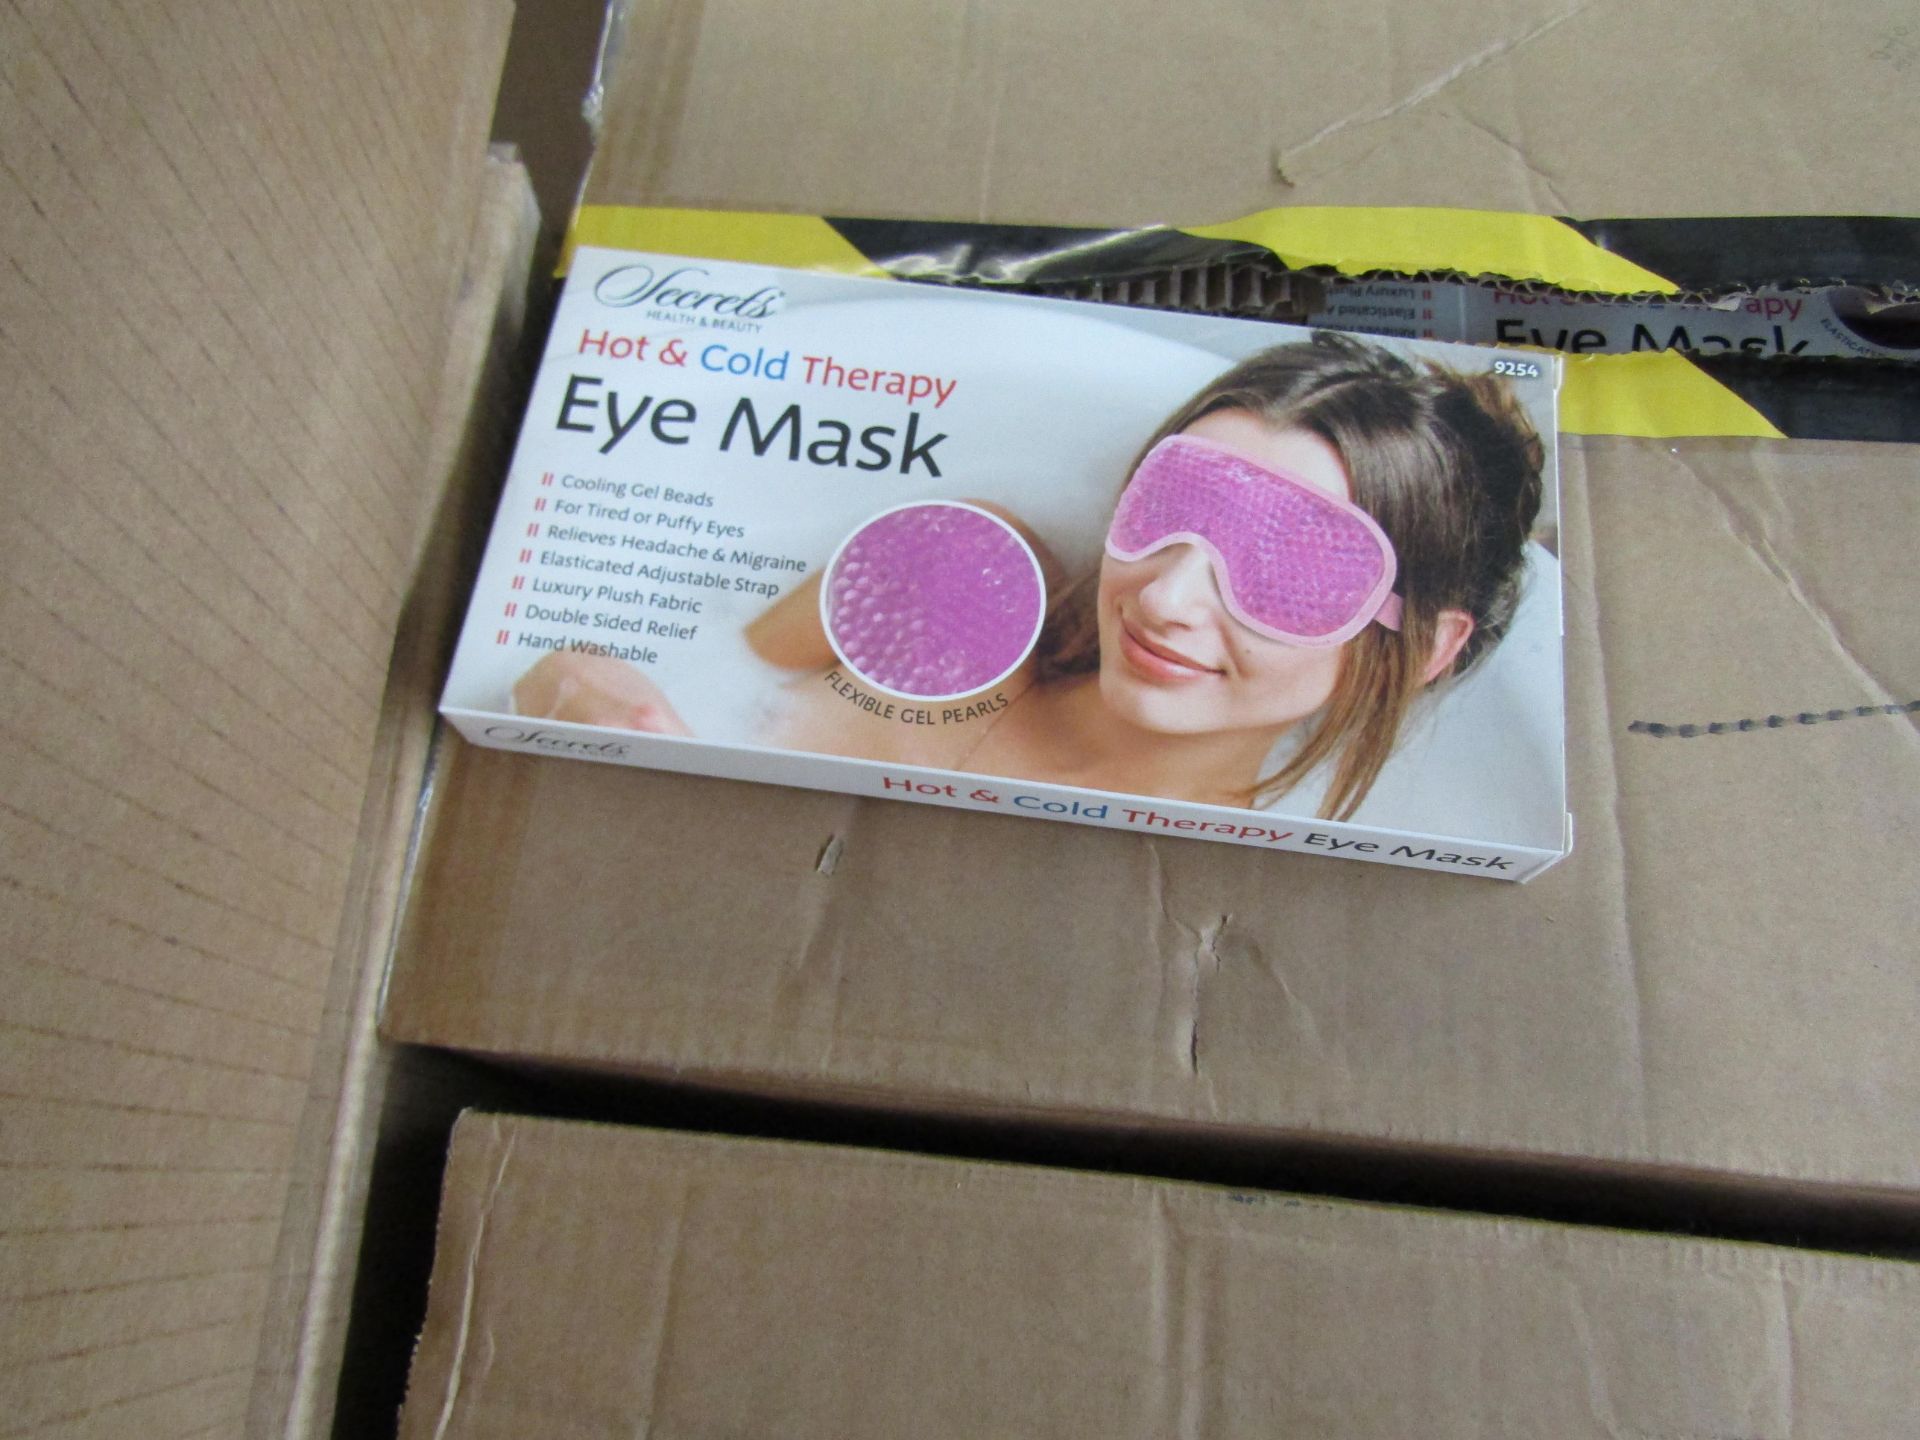 10x Secrets Hot and Cold therapy eye masks, unused and boxed